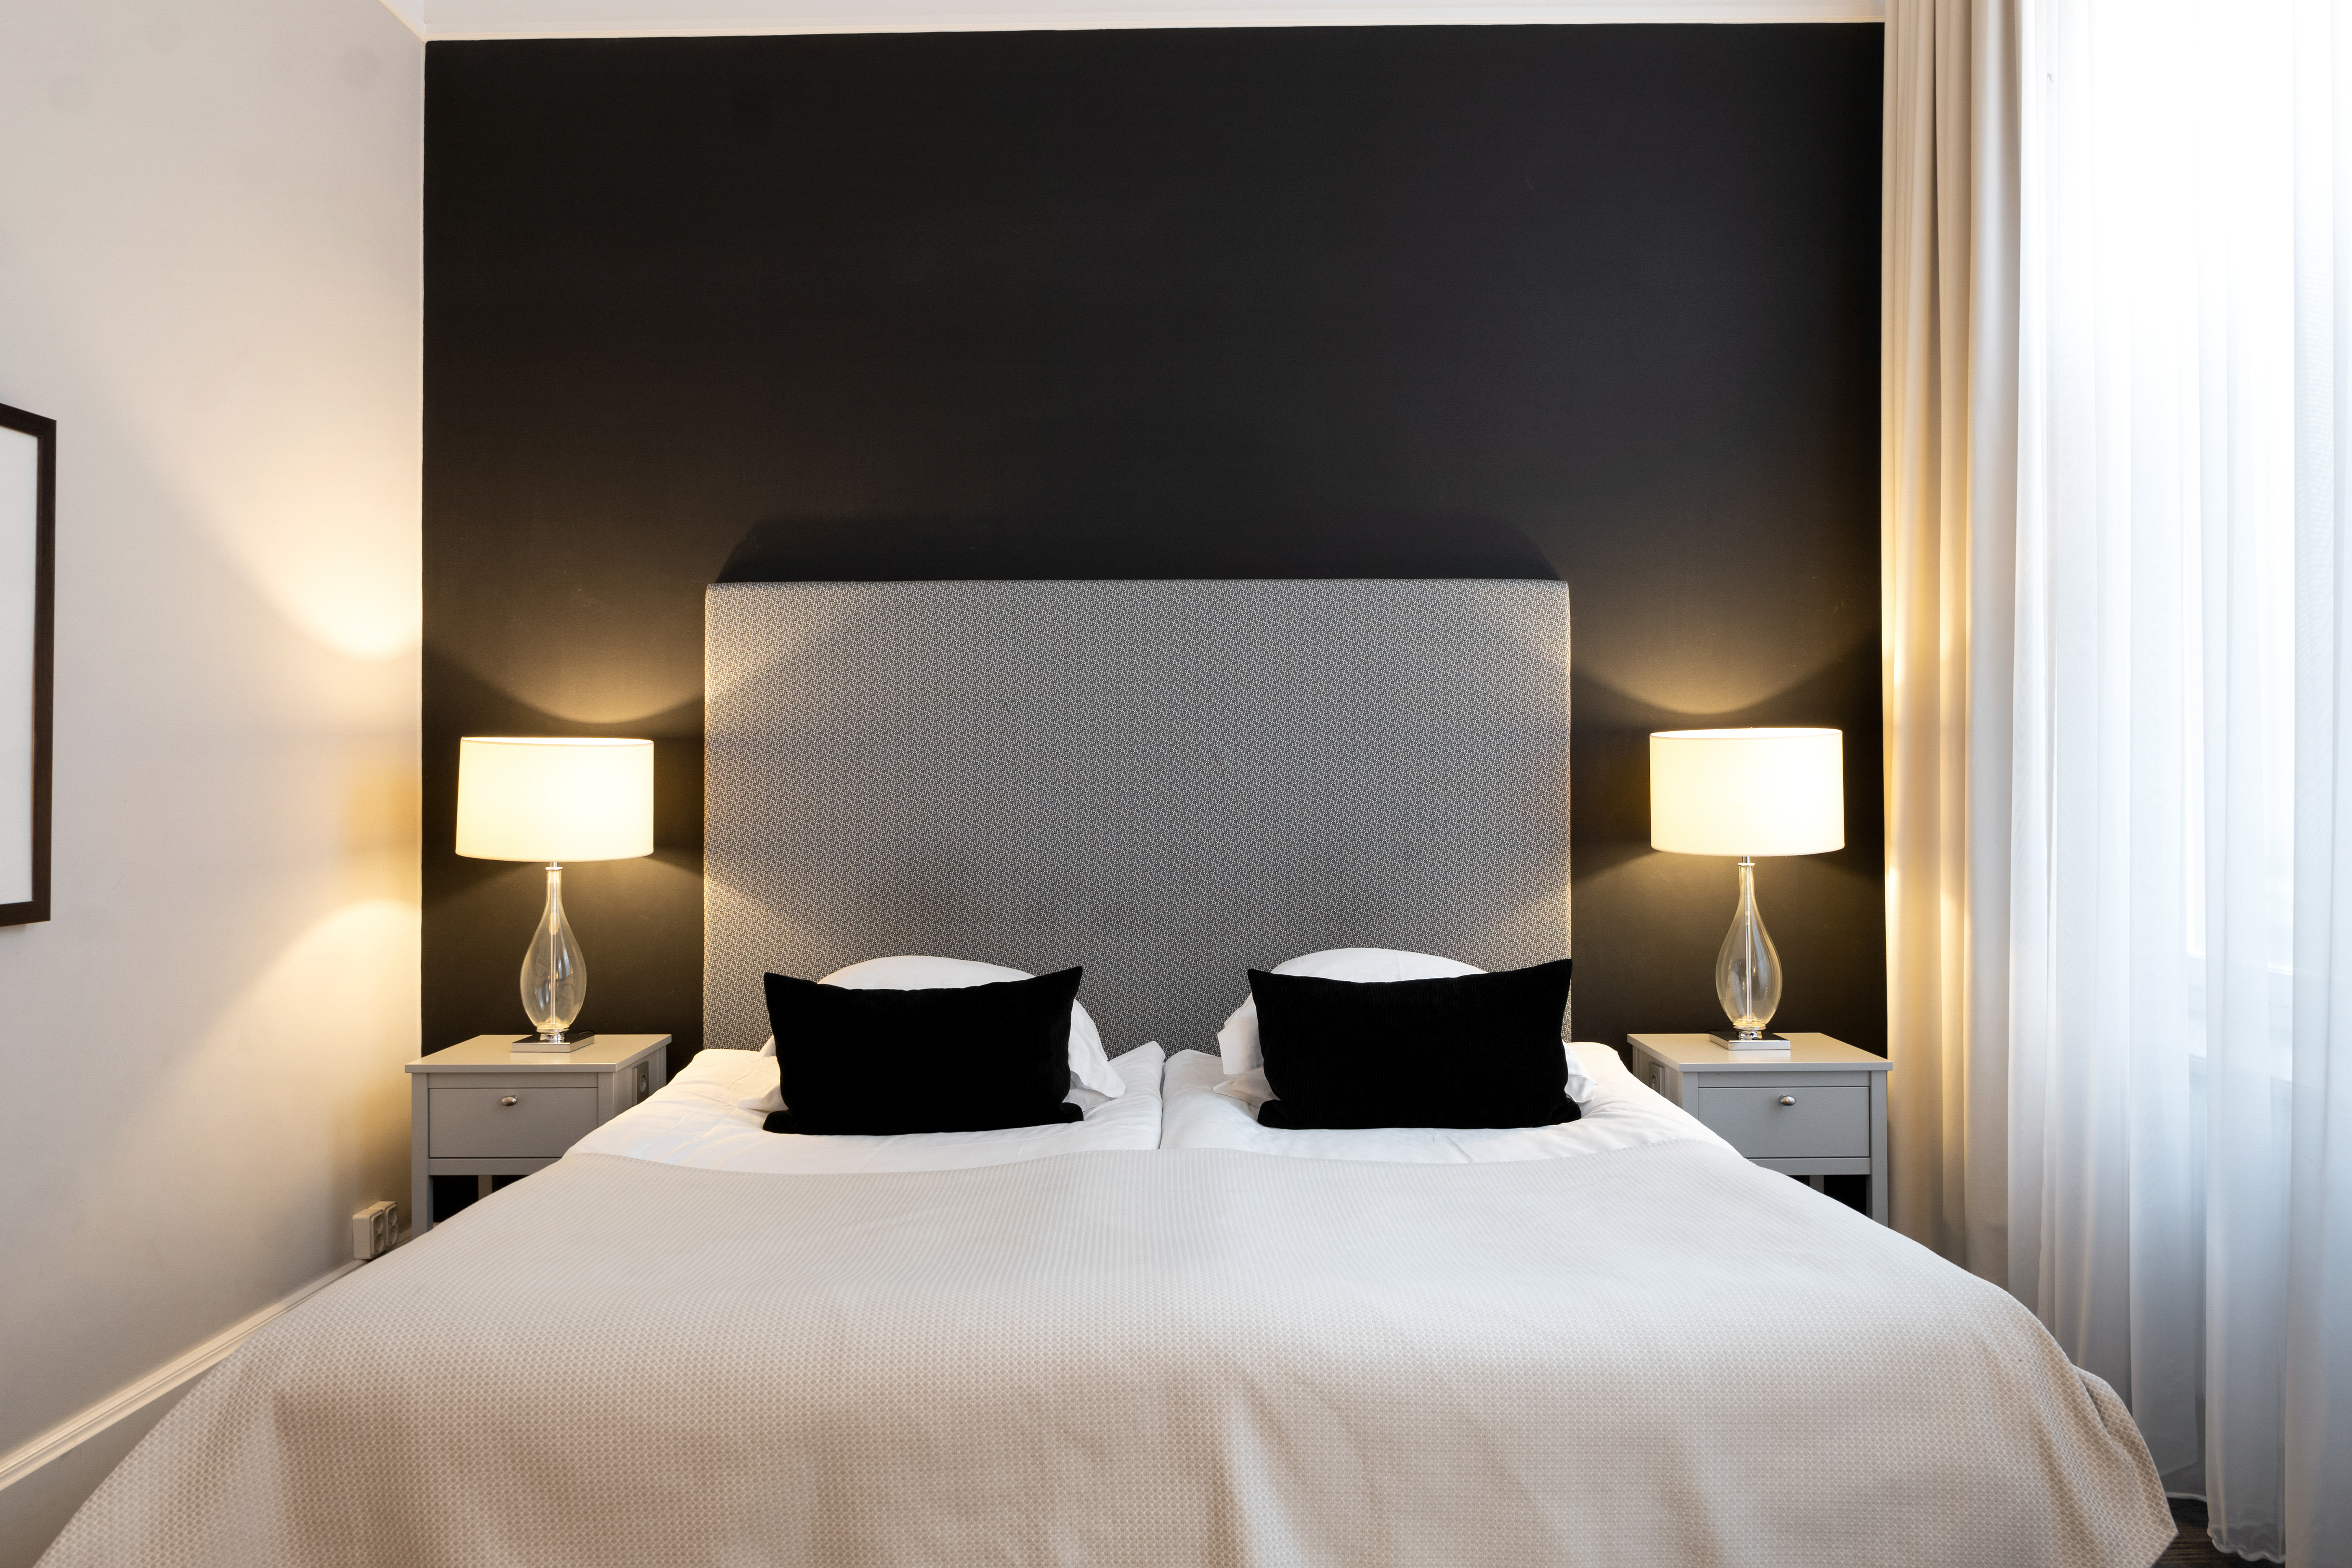 Hotel room with black wall, bed and bedside lamps